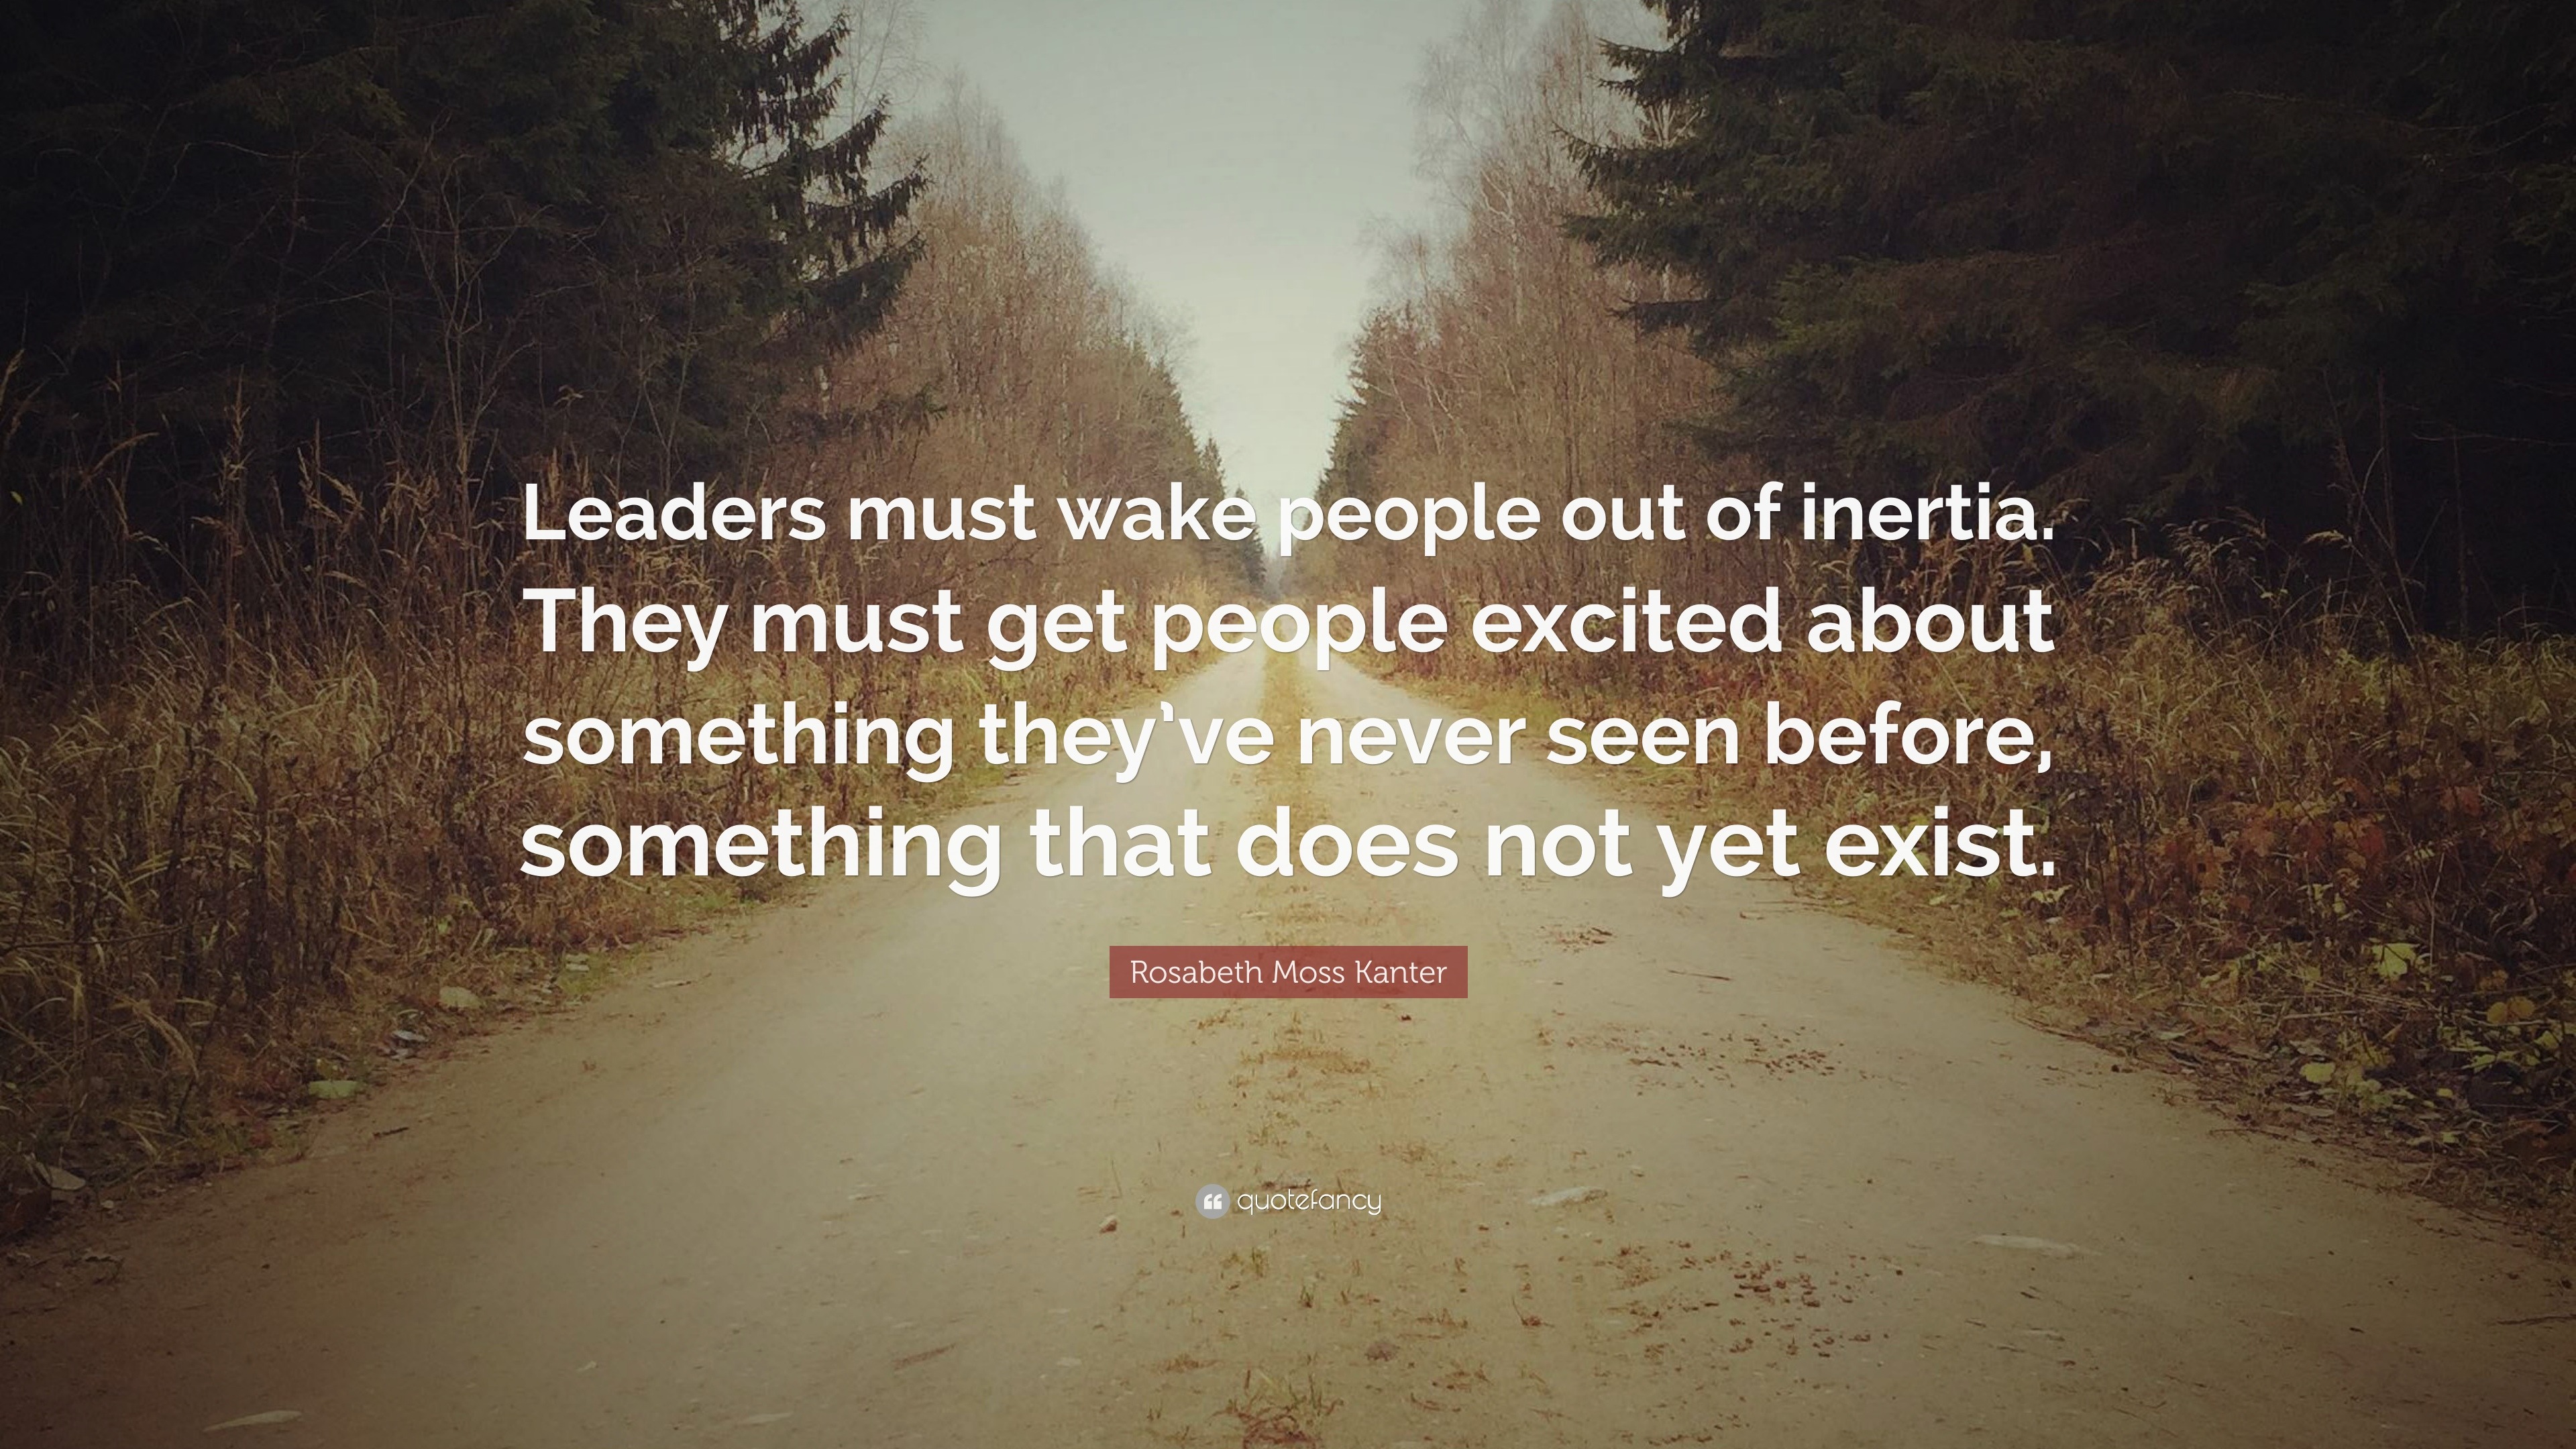 https://quotefancy.com/media/wallpaper/3840x2160/975240-Rosabeth-Moss-Kanter-Quote-Leaders-must-wake-people-out-of-inertia.jpg